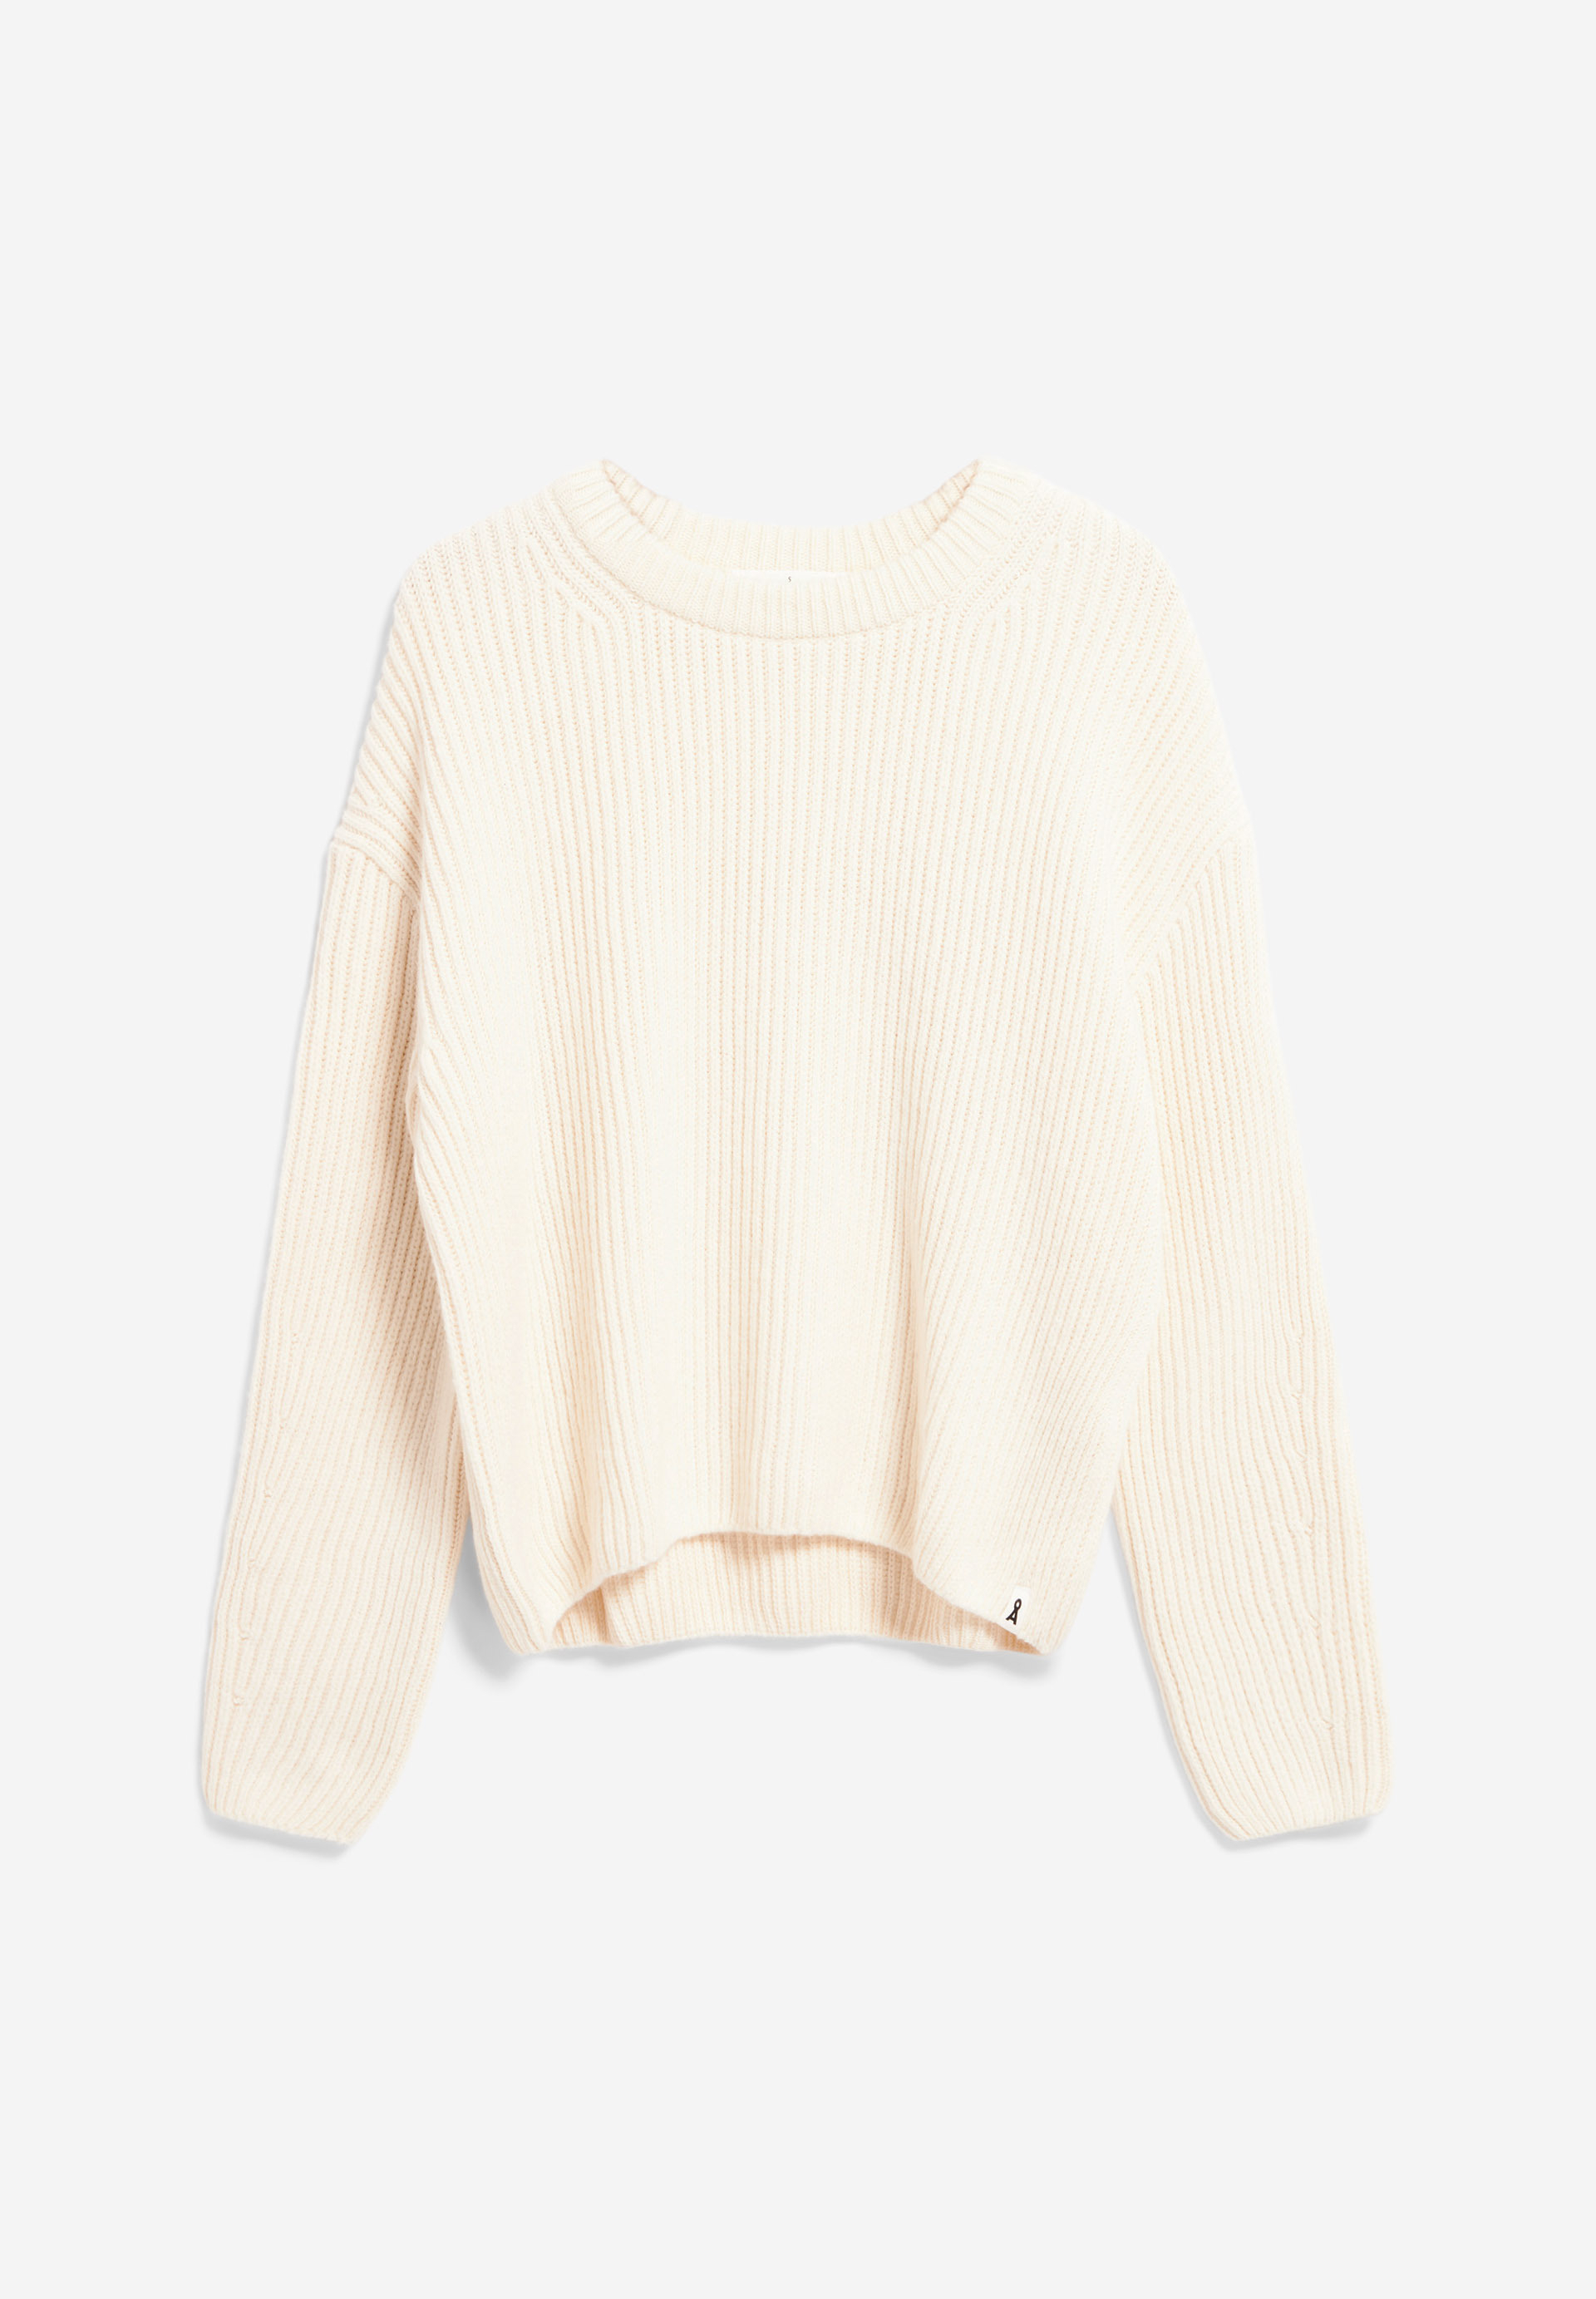 NAARUKO Sweater Oversized Fit made of Organic Cotton Mix